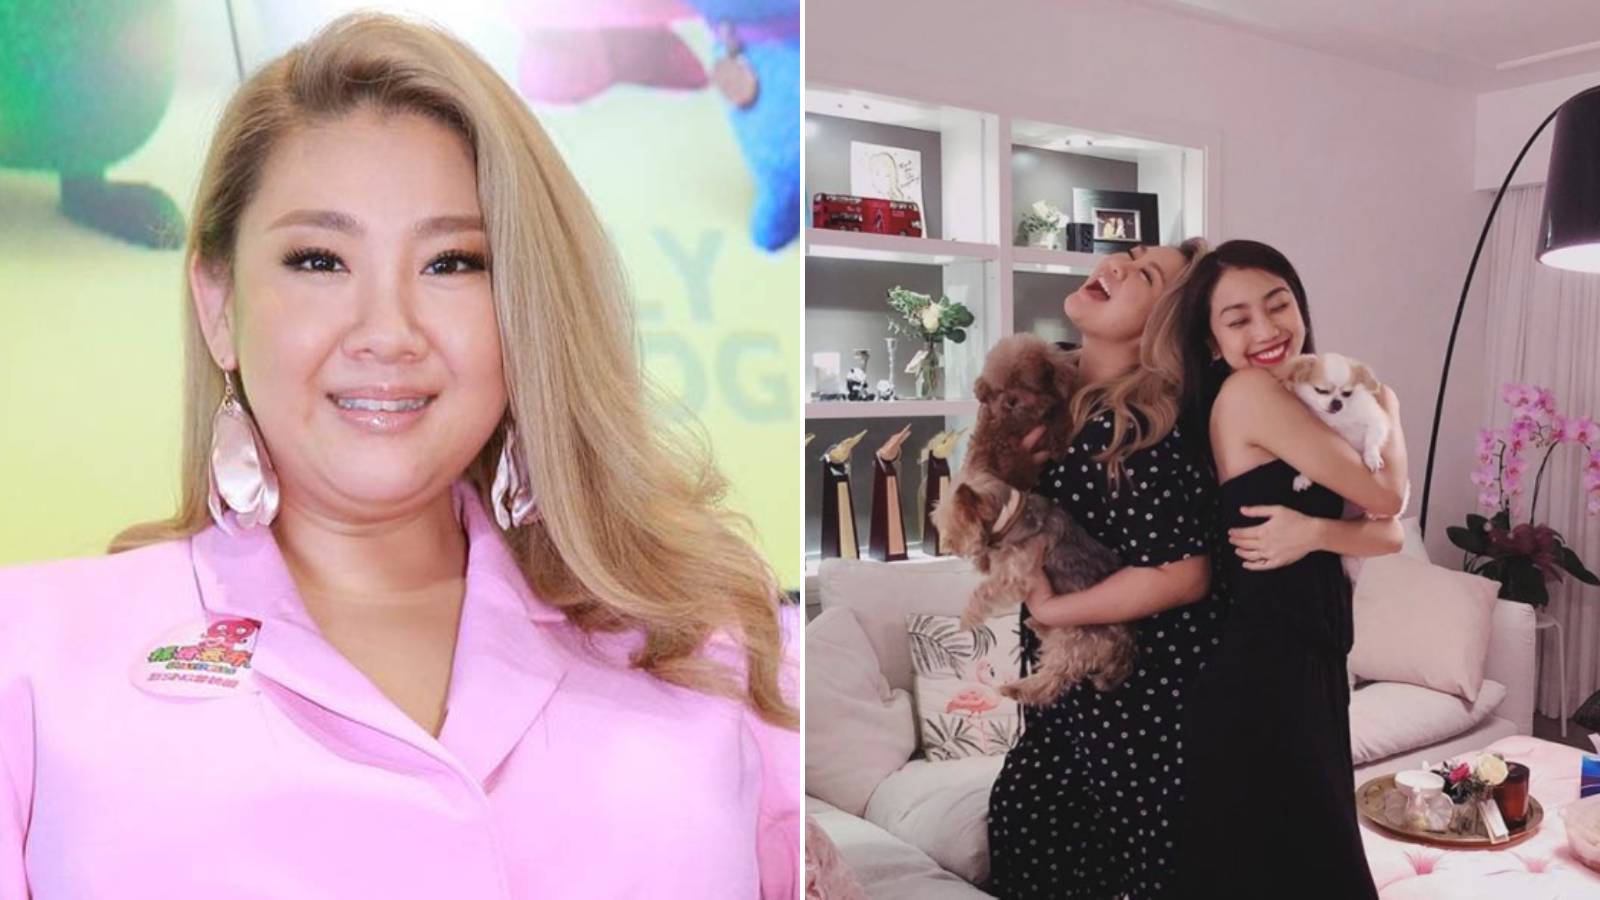 Joyce Cheng’s Hongkong Apartment Revealed; Is Set To Receive Her $11mil Inheritance From Her Late Mum Lydia Sum In 3 Years